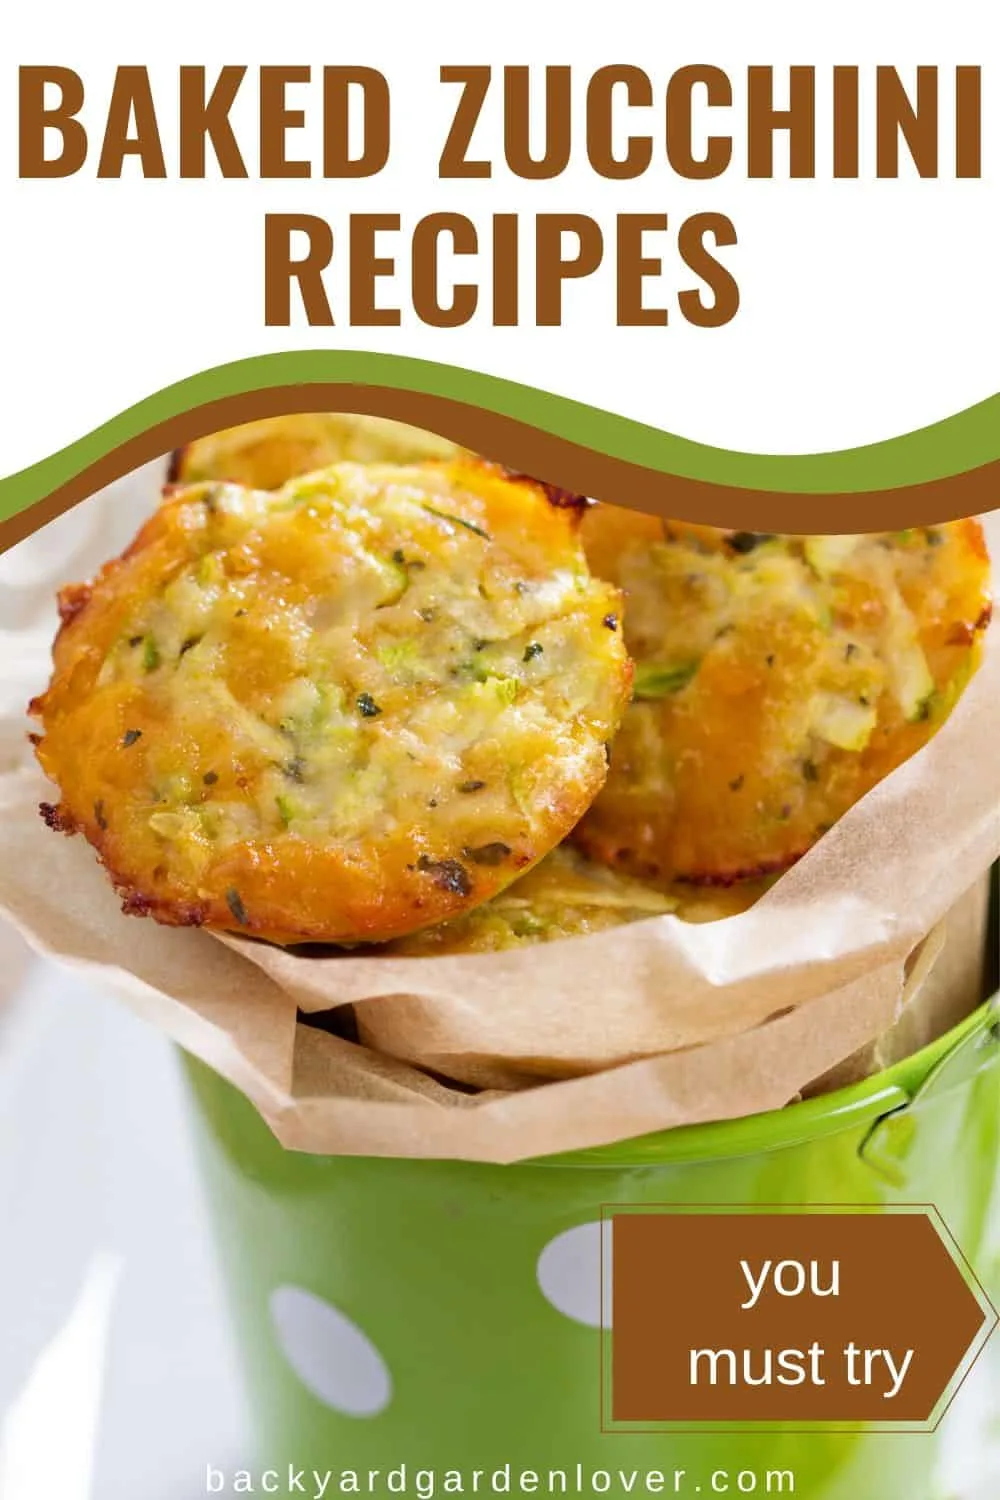 Tasty baked zucchini recipes your family needs to try